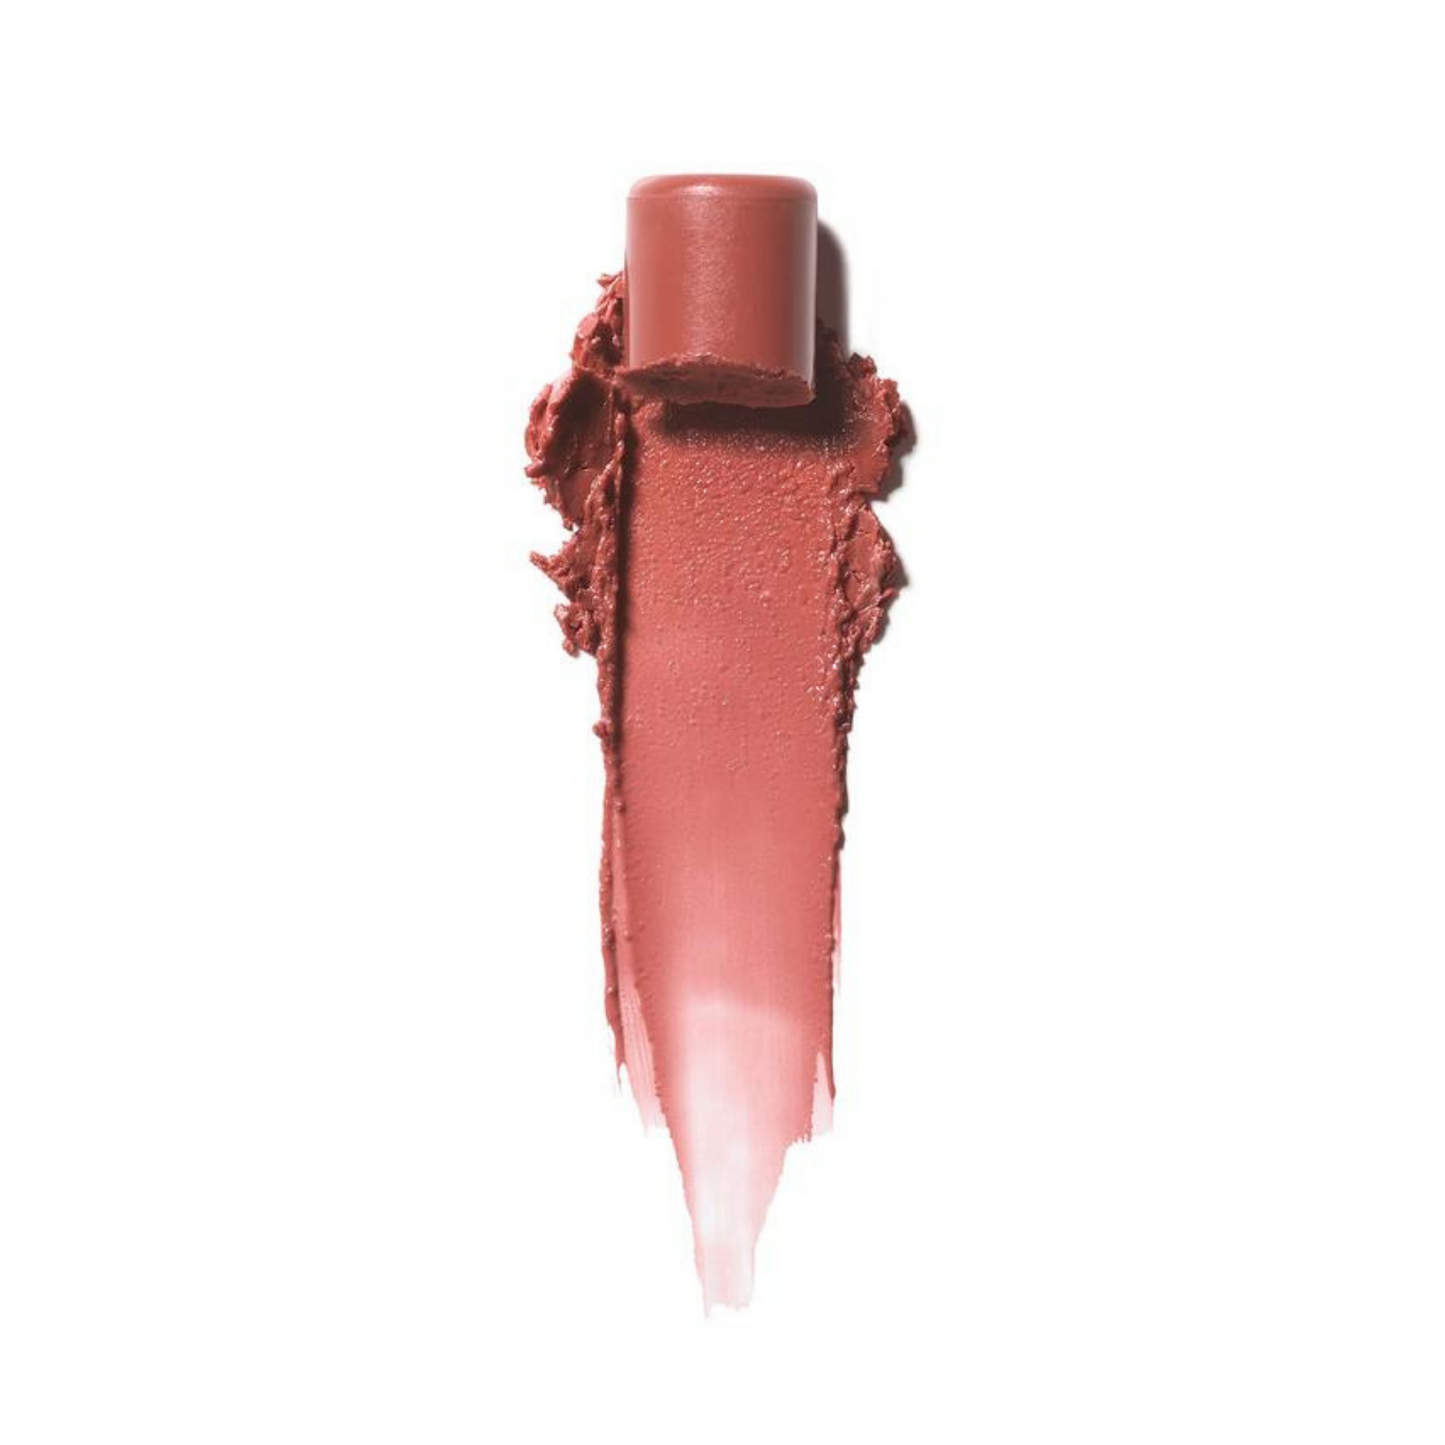 Primary image of Hold Me Tinted Balm Swatch